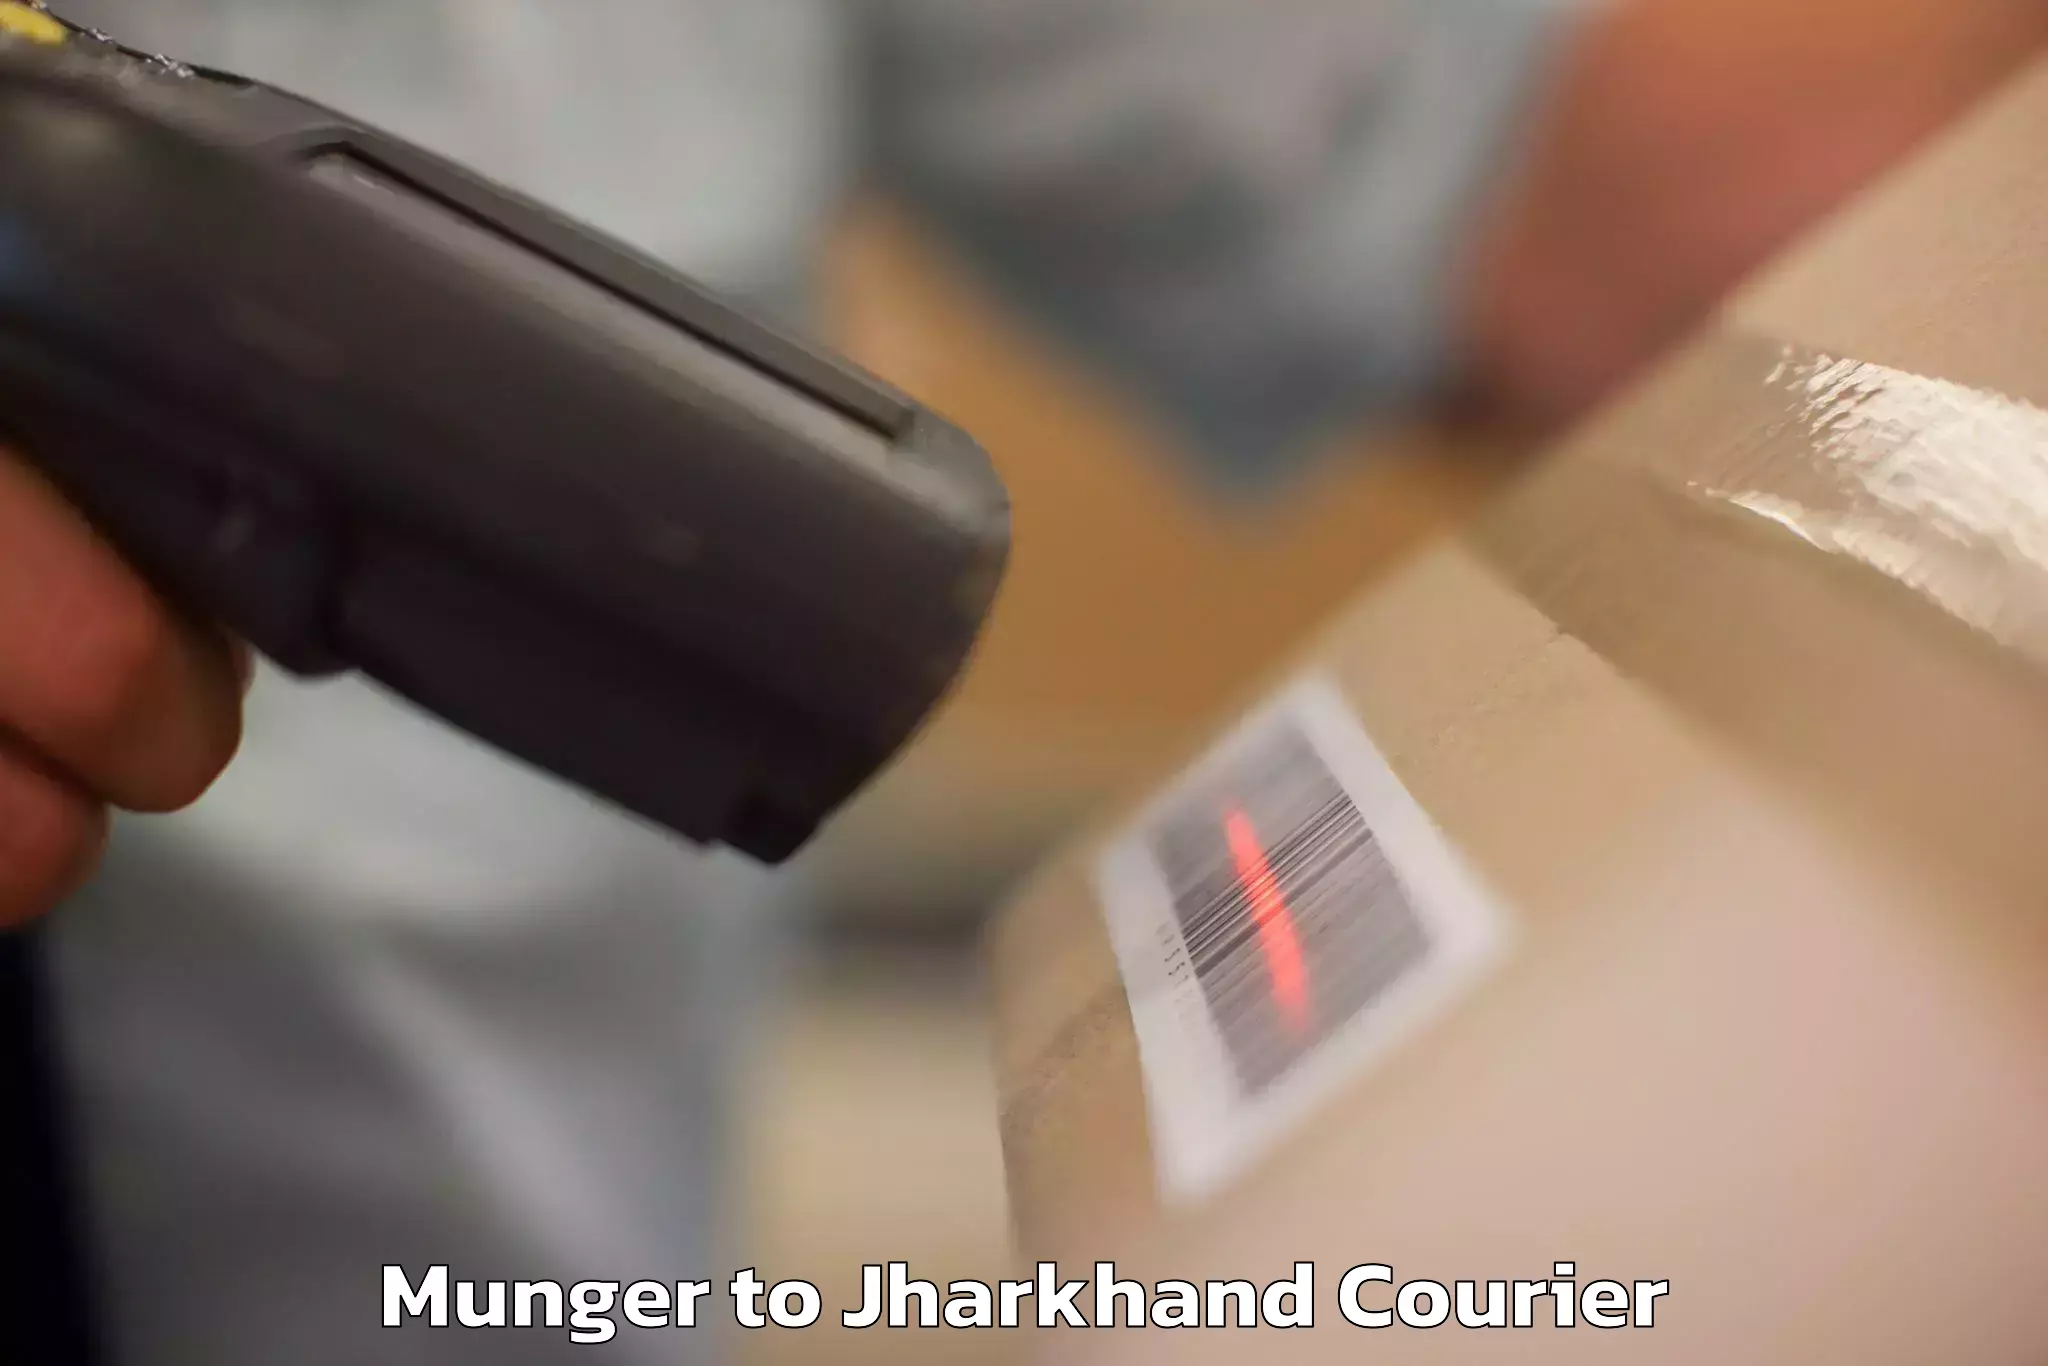 Baggage transport network Munger to Jharkhand